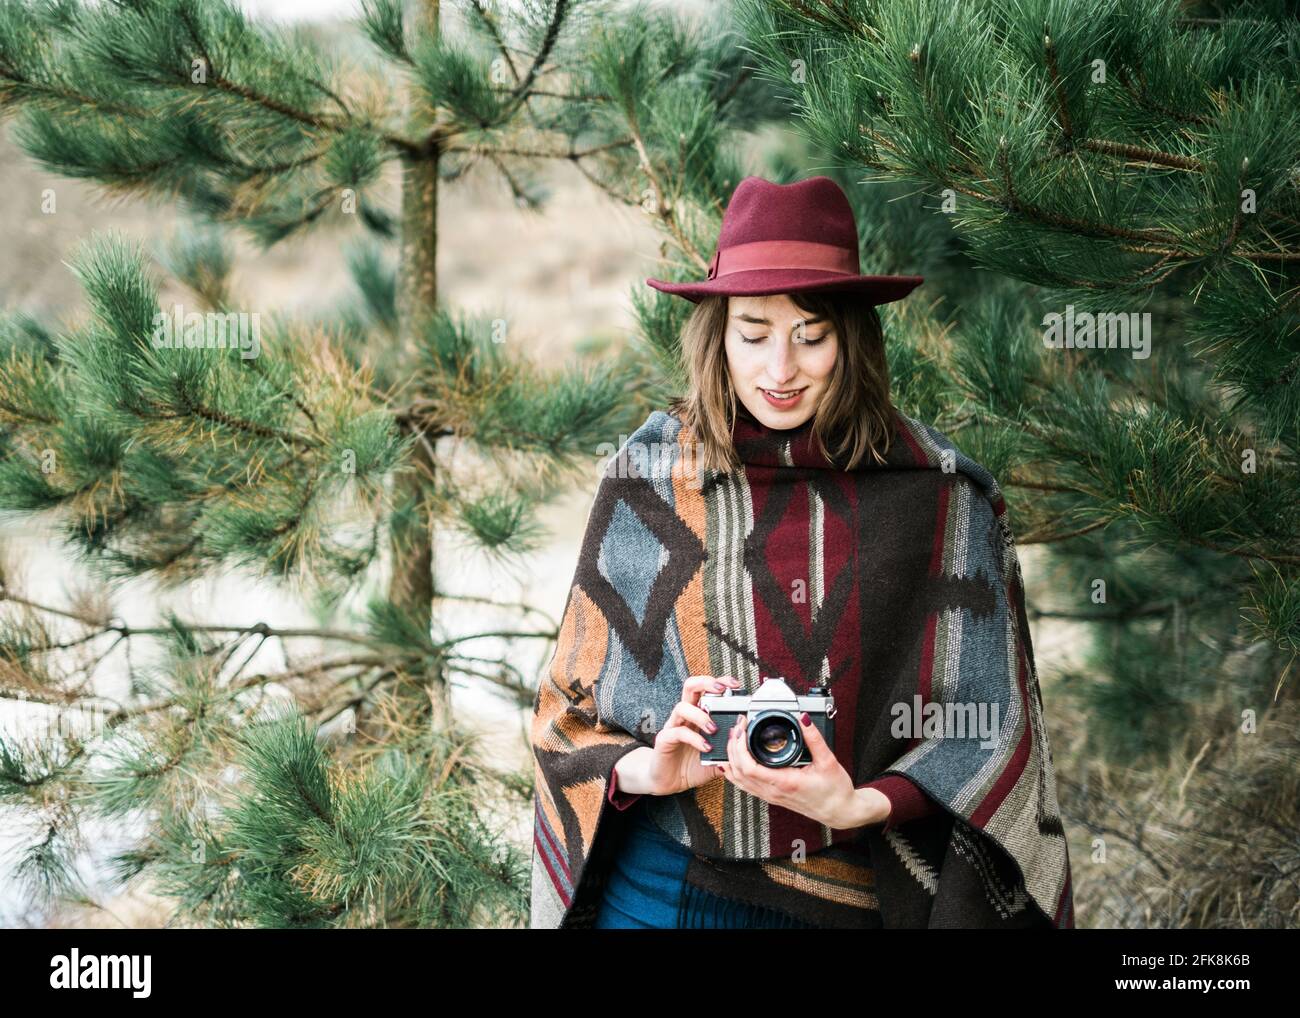 Young woman in a forest holding a vintage camera. Kinfolk / outdoors style. Stock Photo